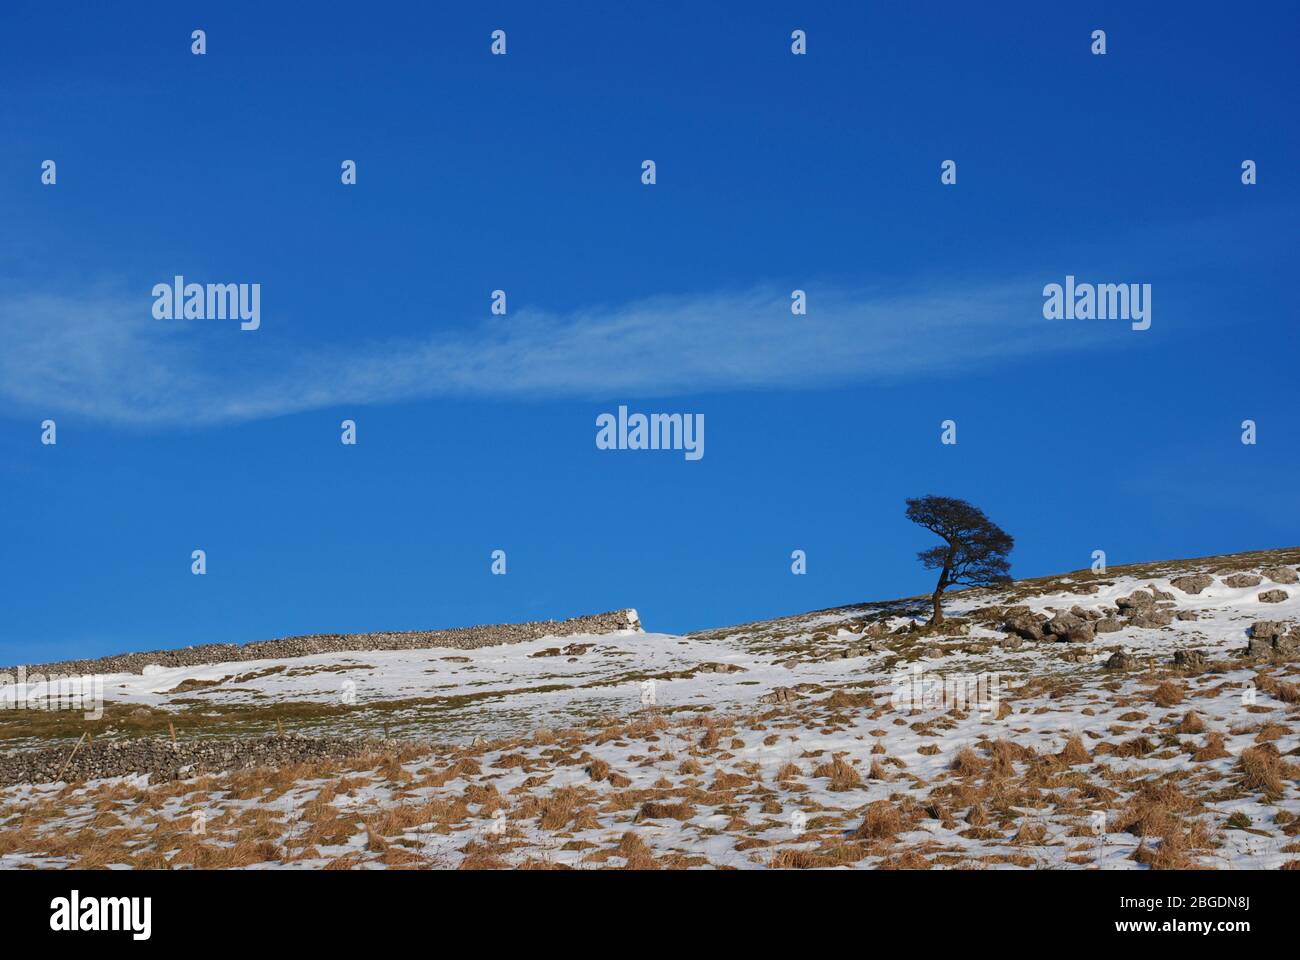 Winter scene in the Yorkshire Dales showing snow covered field with dry stone wall on the horizon and a single tree against a bright blue sky Stock Photo